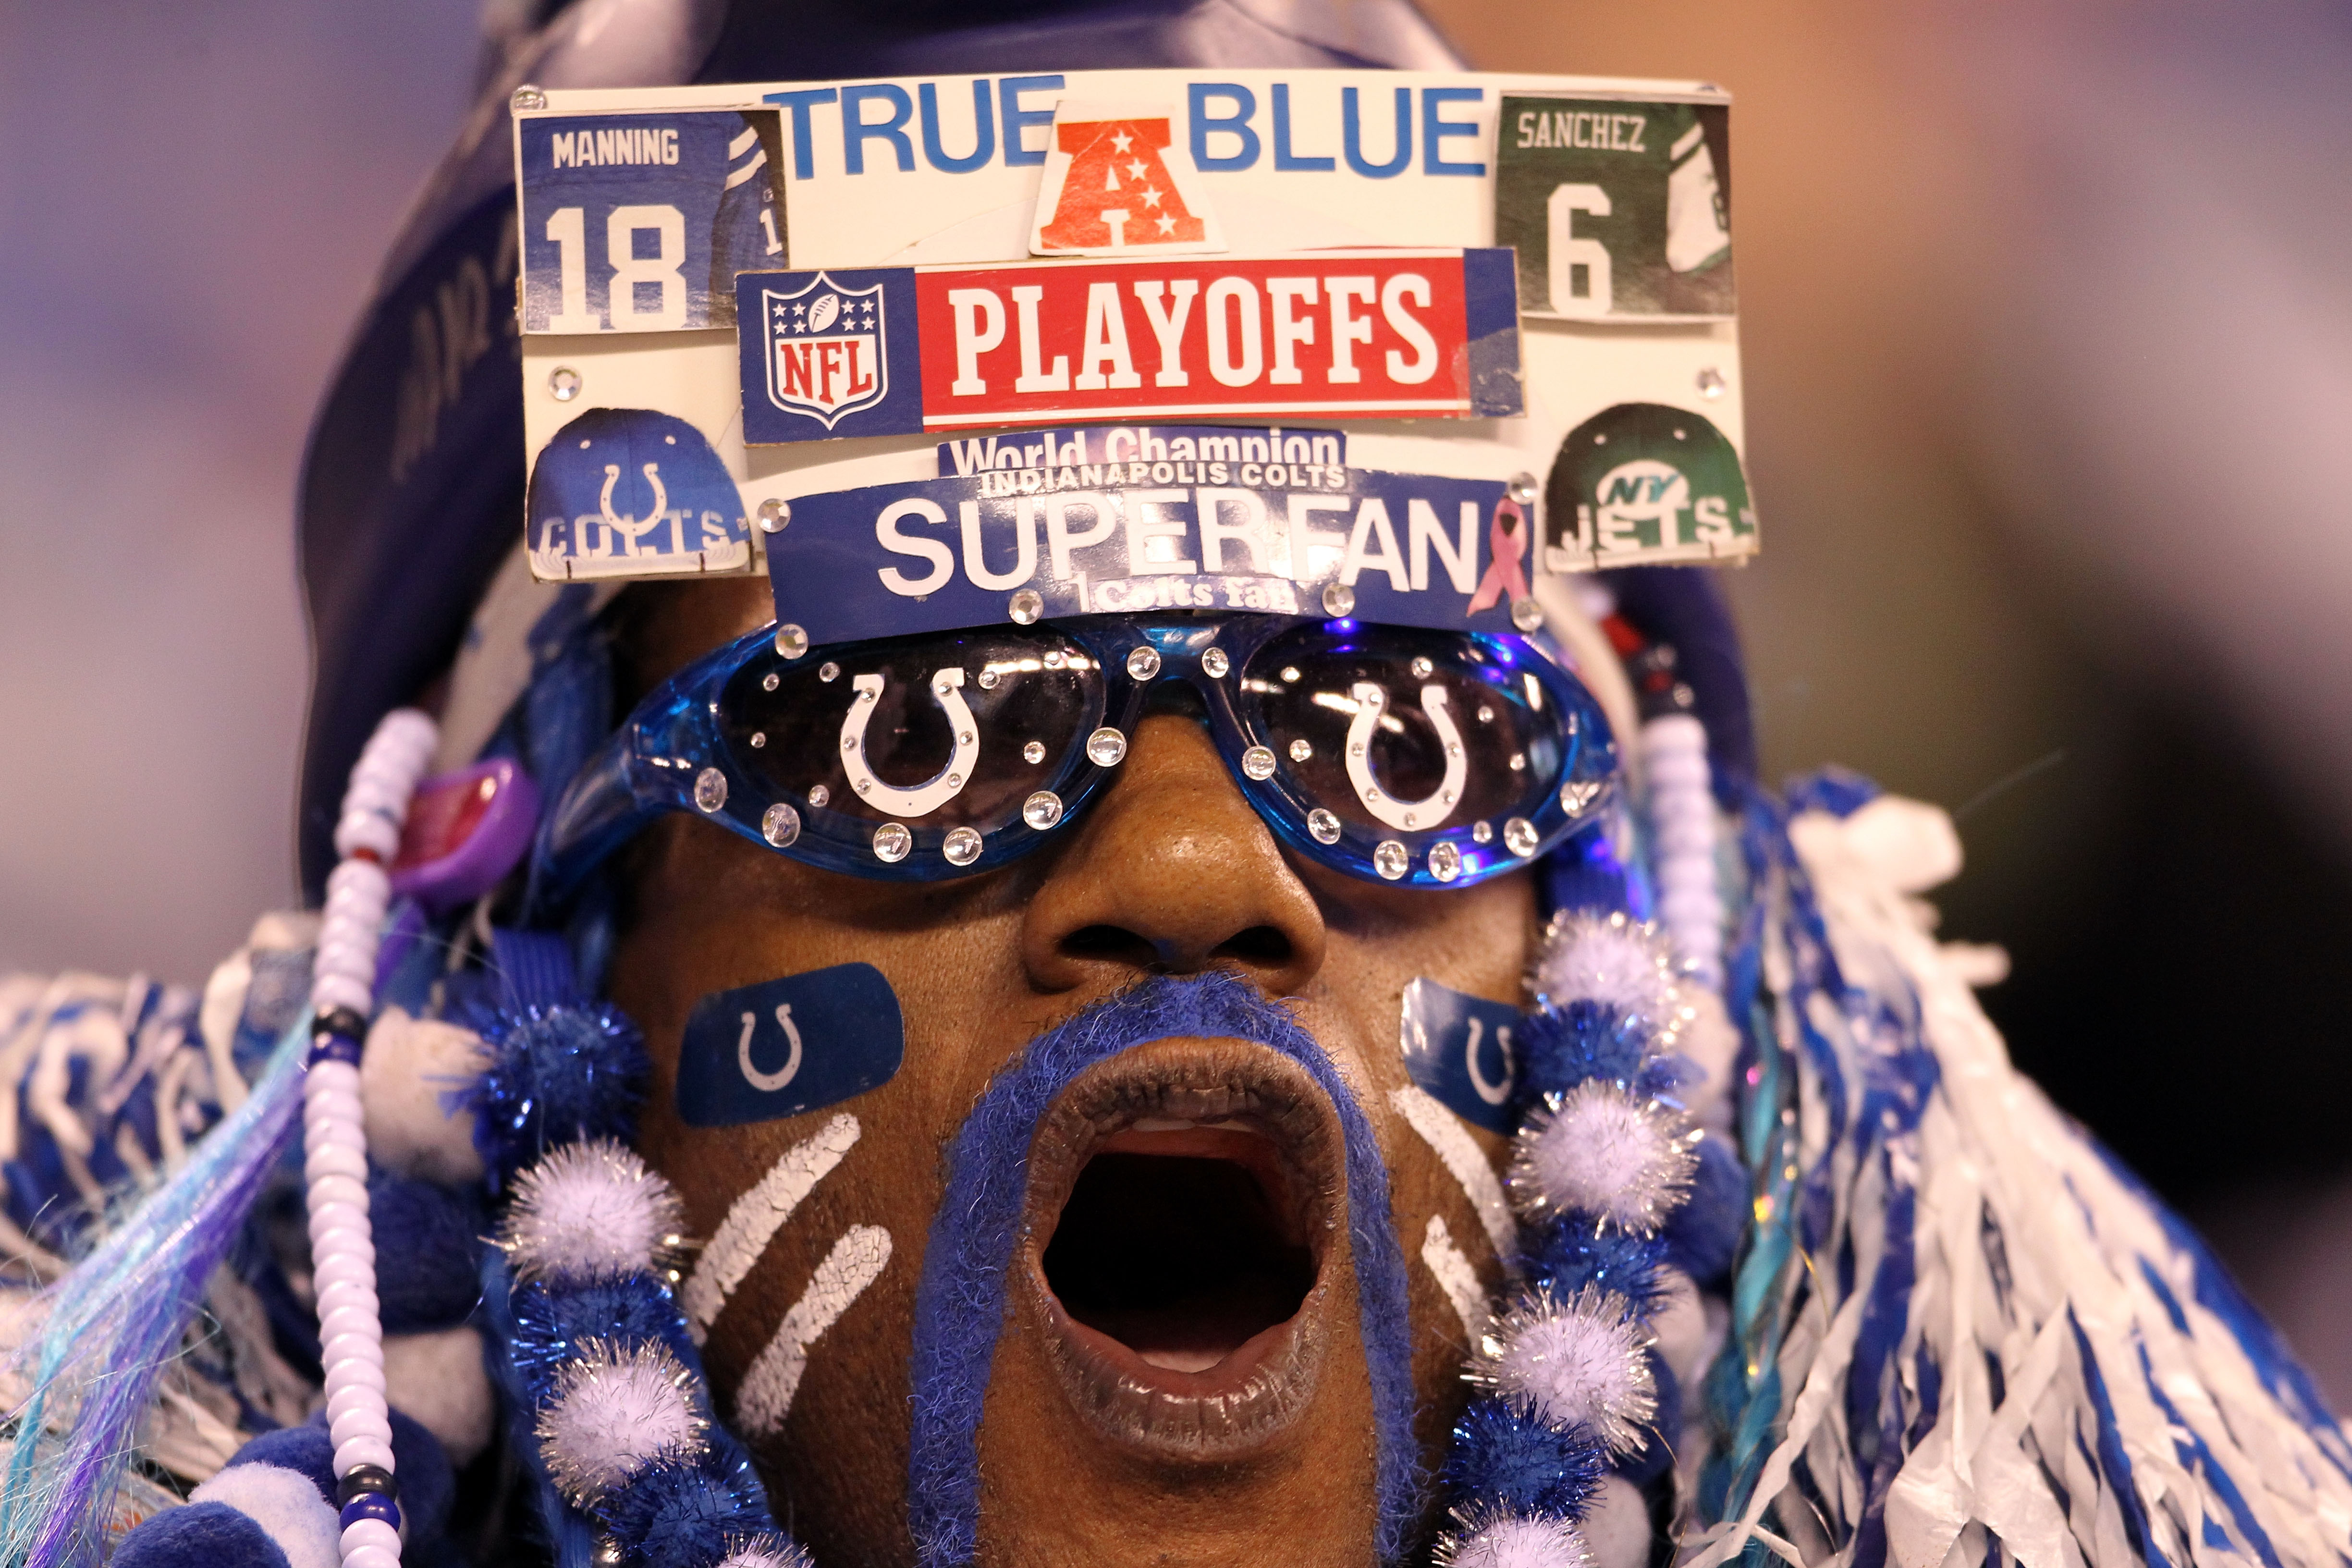 INDIANAPOLIS, IN - JANUARY 08:  A fan of the Indianapolis Colts supports his team against the New York Jets during their 2011 AFC wild card playoff game at Lucas Oil Stadium on January 8, 2011 in Indianapolis, Indiana.  (Photo by Andy Lyons/Getty Images)